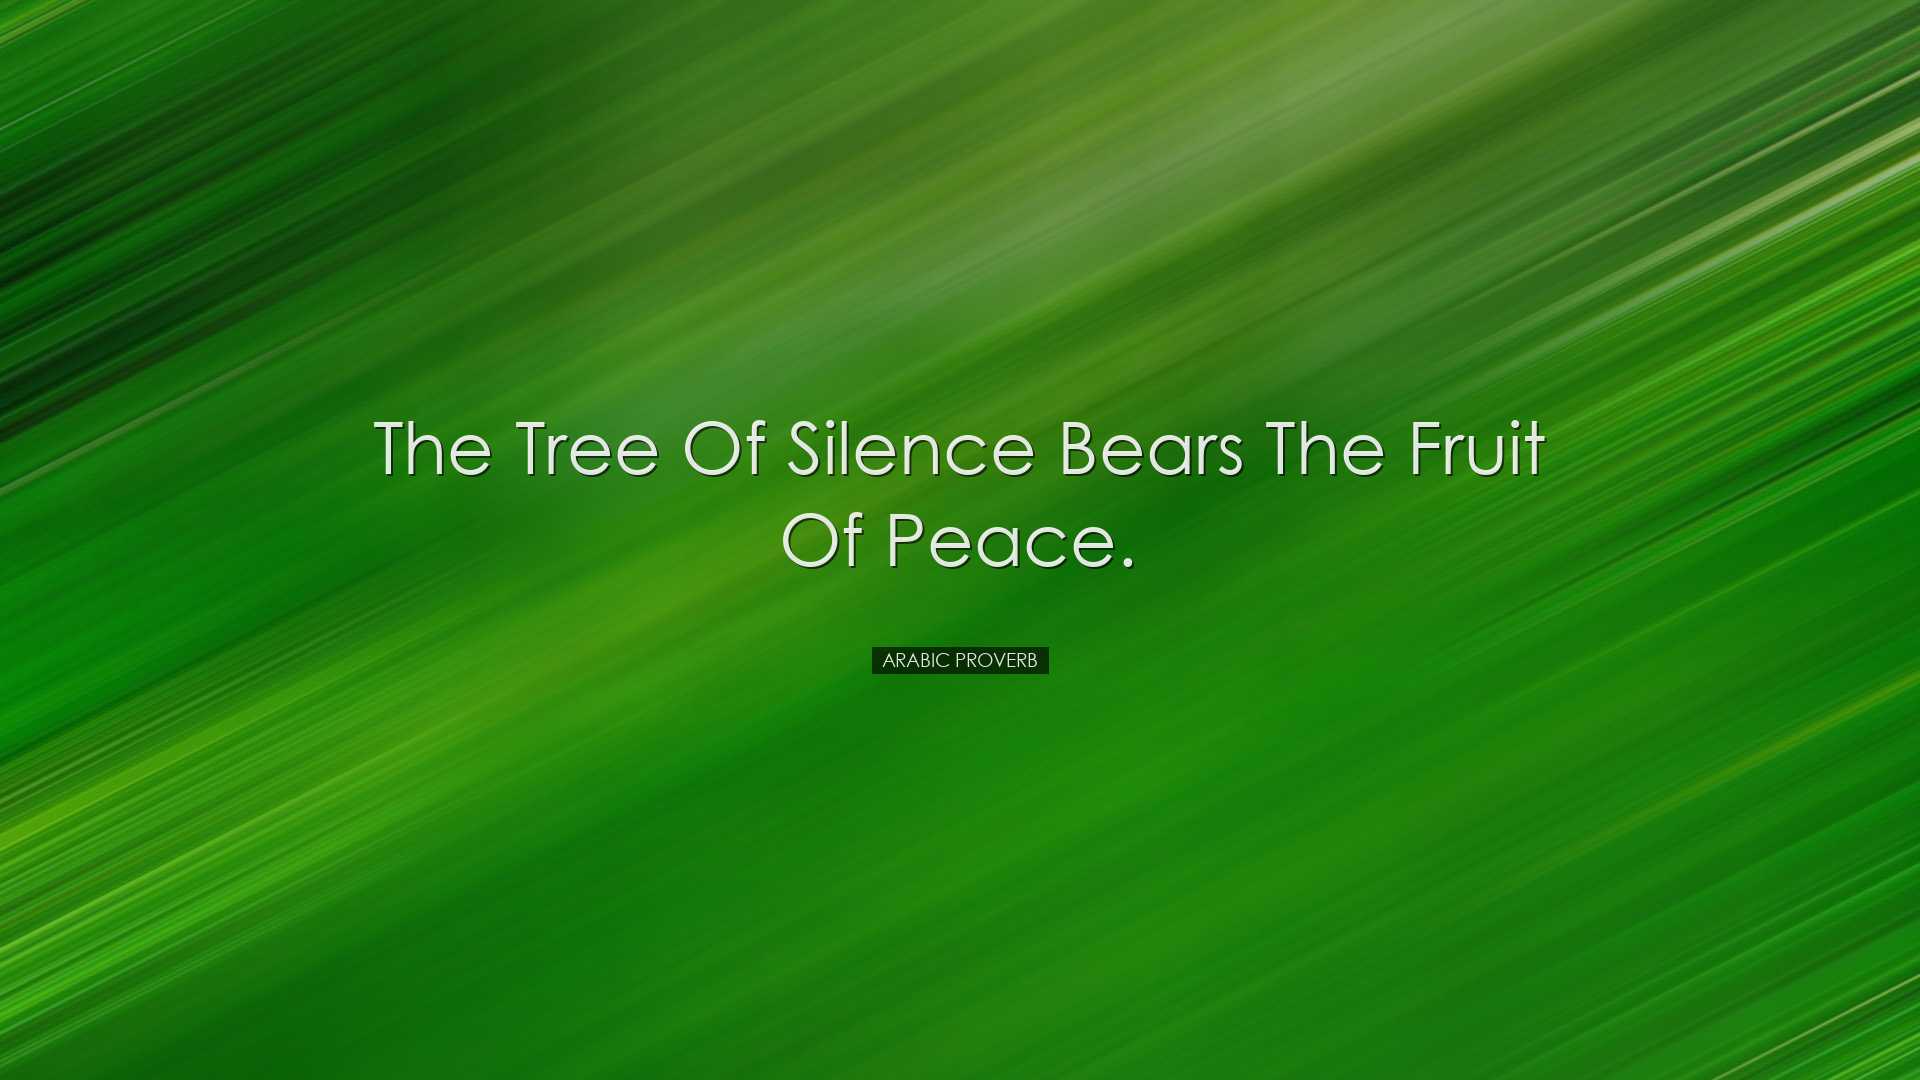 The tree of silence bears the fruit of peace. - Arabic Proverb